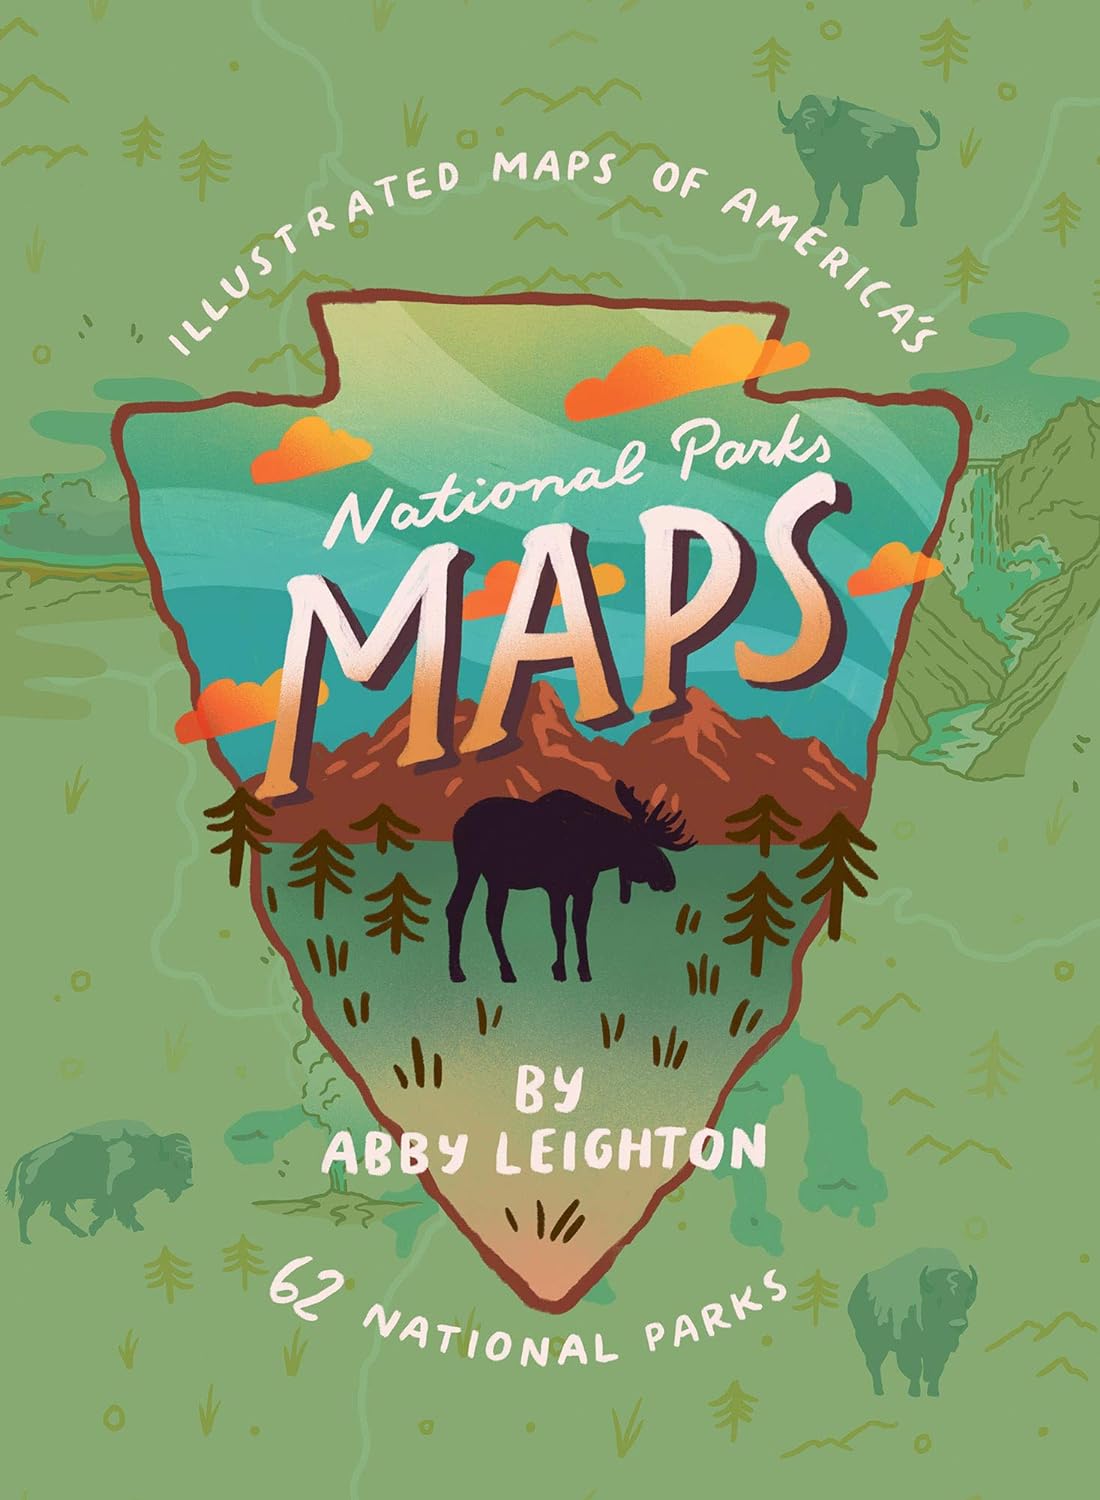 National Parks Maps: